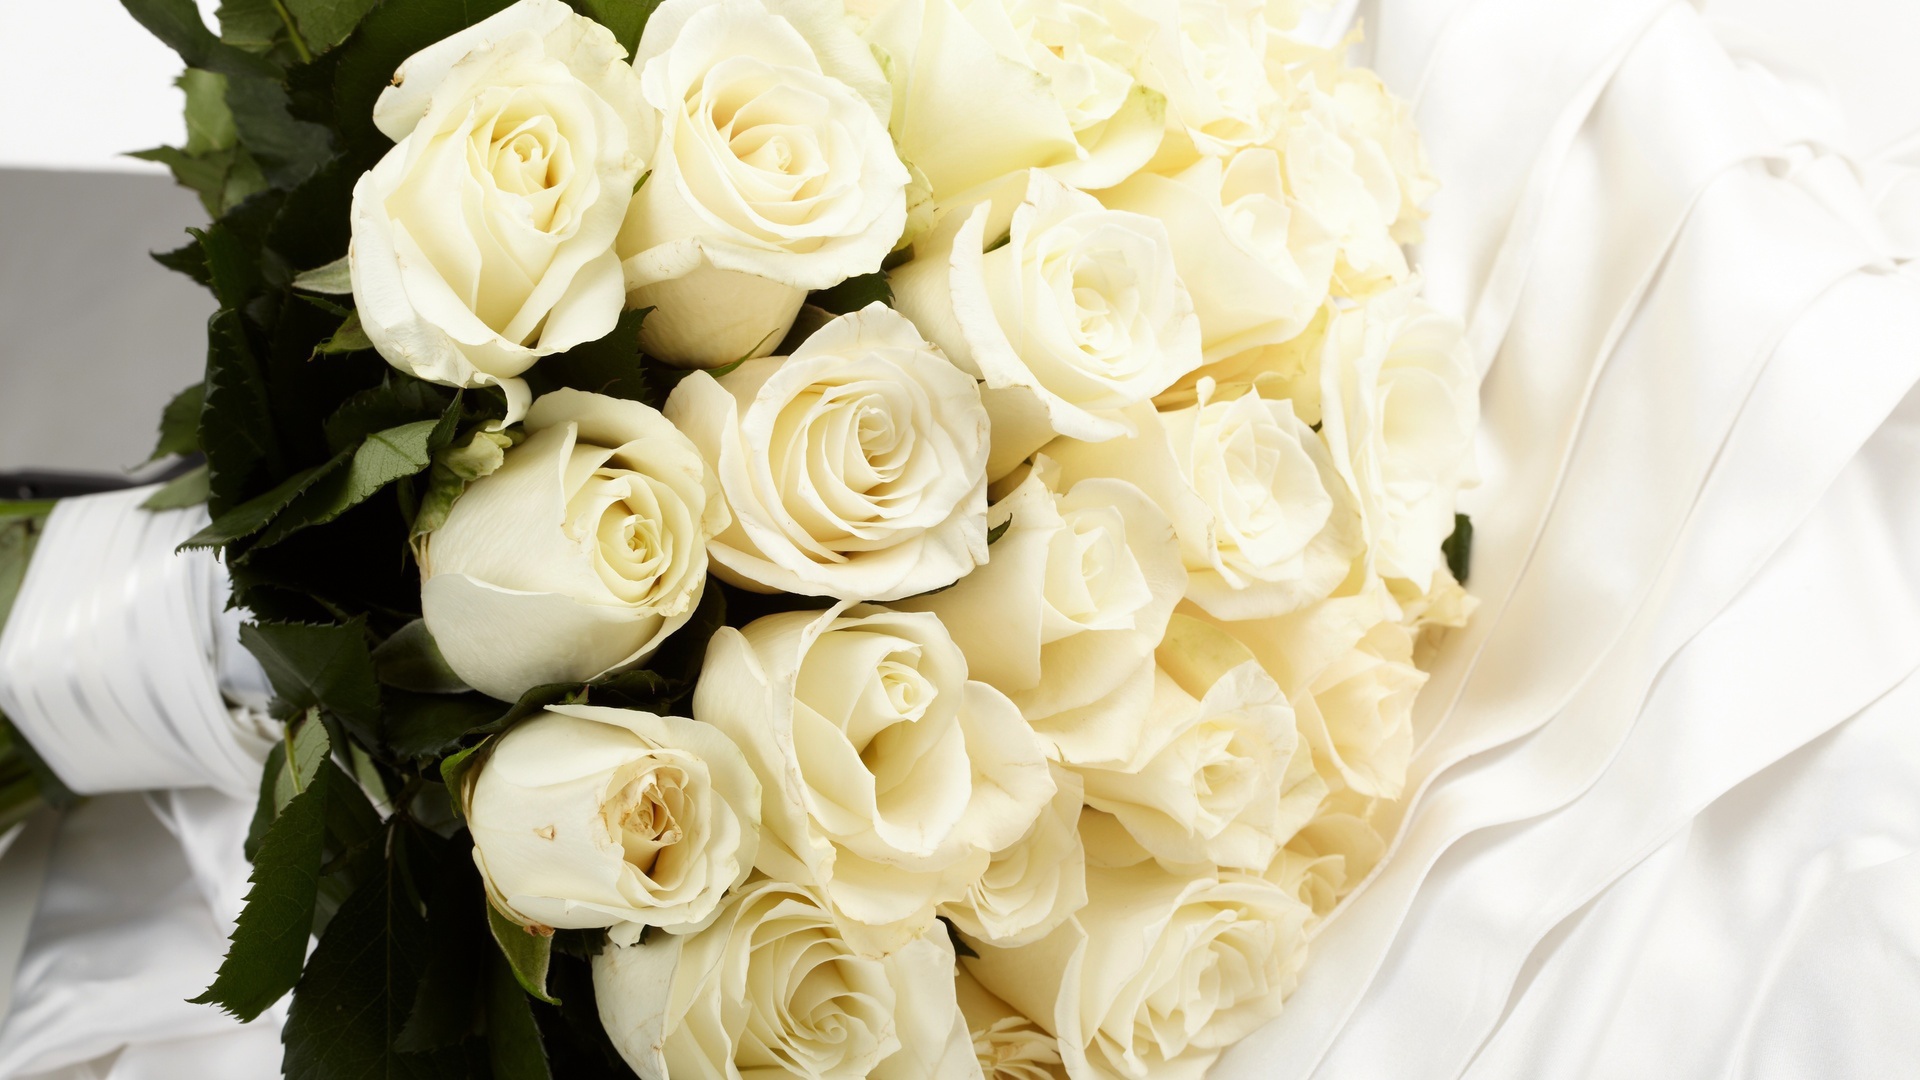 Holidays___Weddings_White_roses_in_a_bouquet_for_the_bride_056313_23.jpg